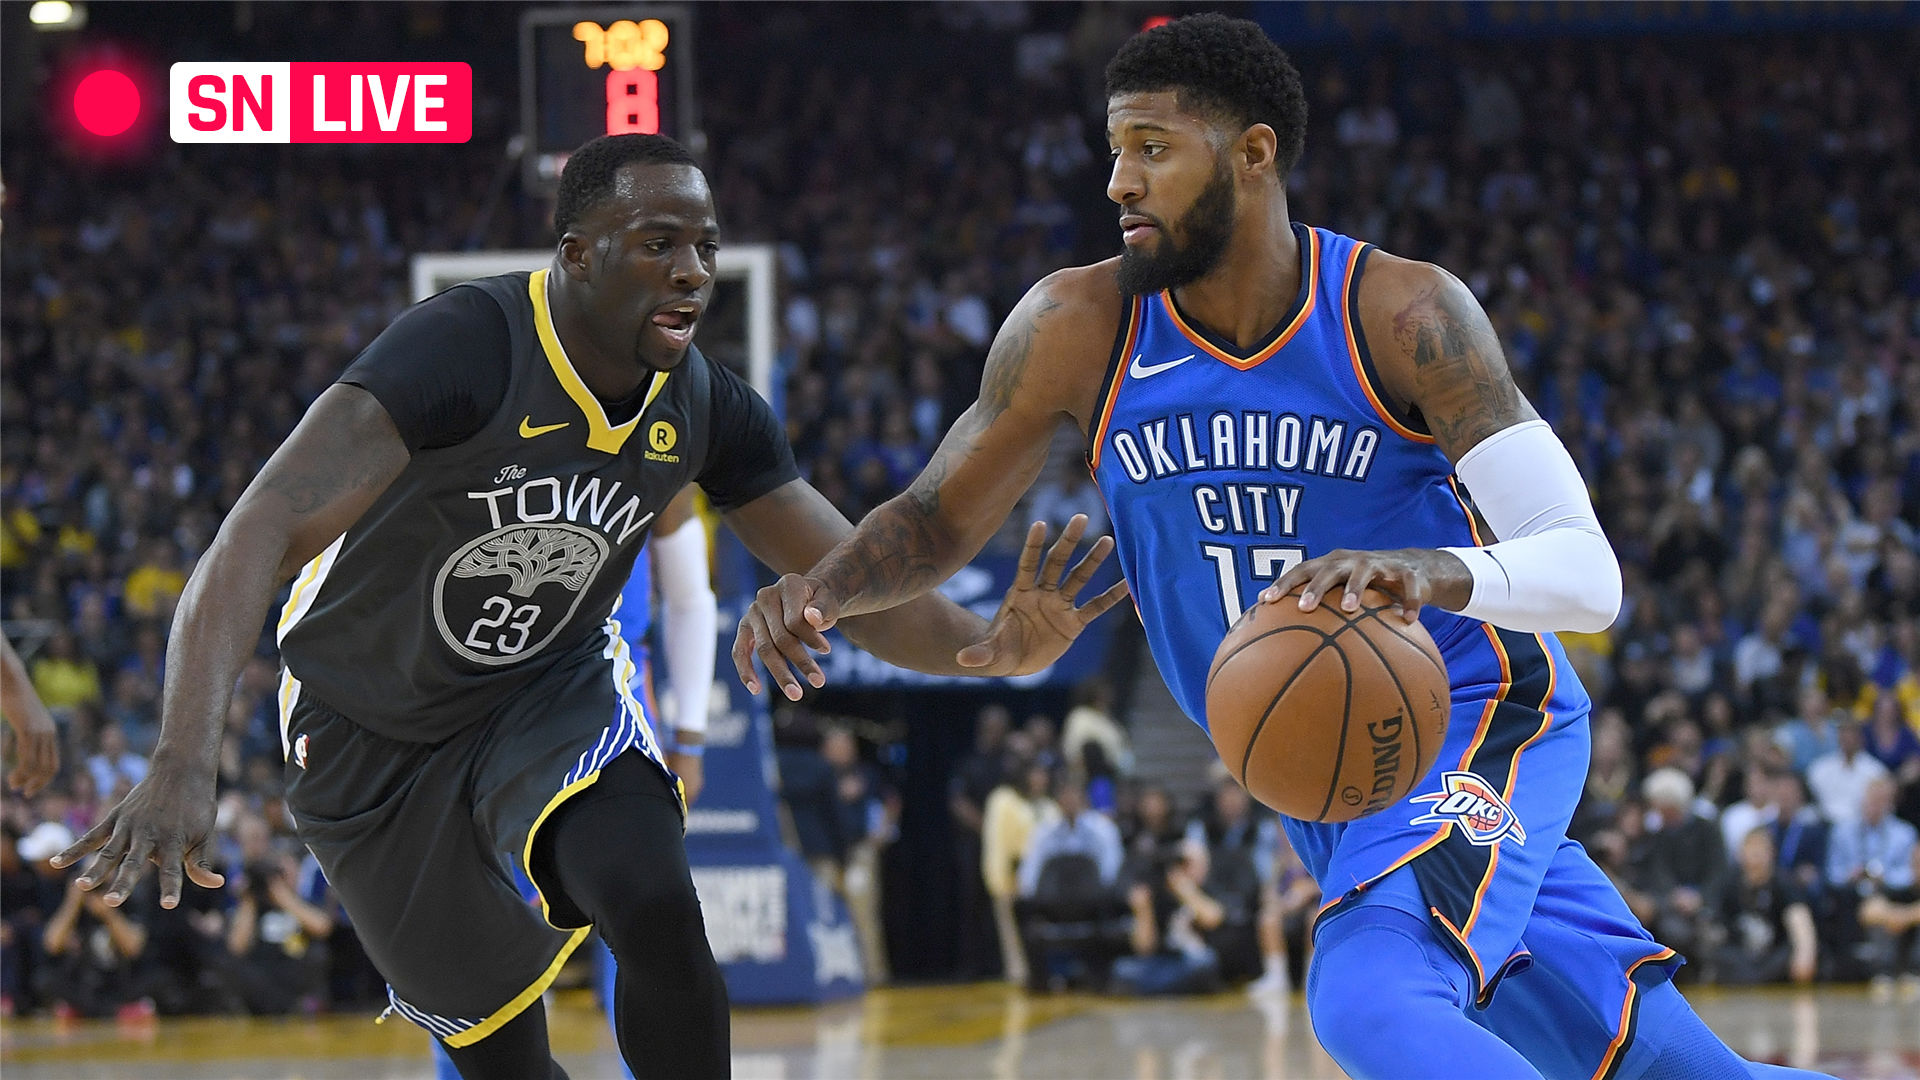 Warriors vs. Thunder Live updates, highlights from opening night